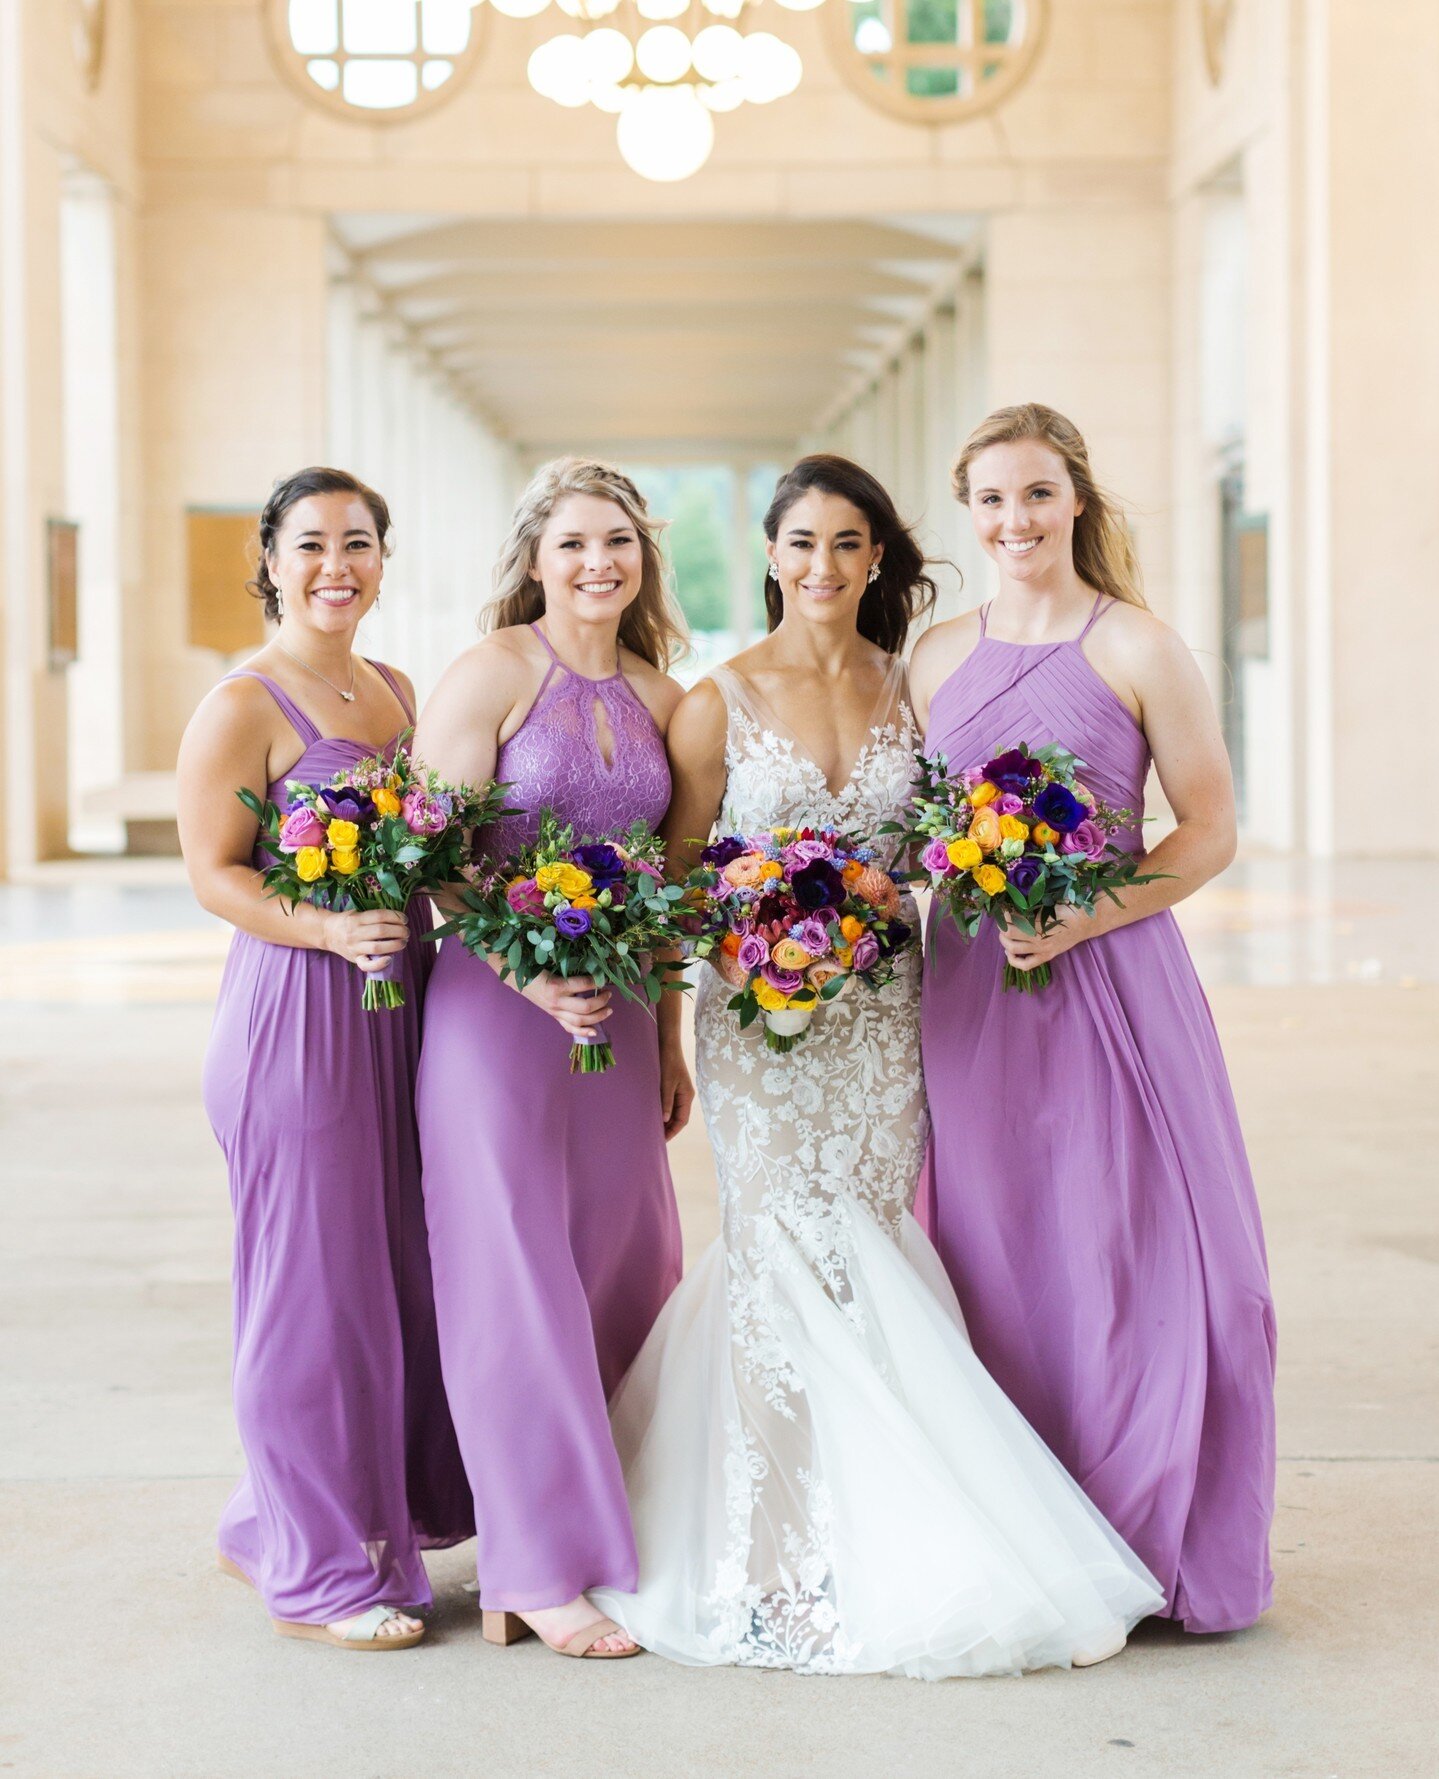 Purple is a sign of royalty, and it certainly suits this bridal party full of beautiful queens! 👑 What extra touches will make you feel like royalty on your wedding day?⁠
⁠
Photo: @lphotographie